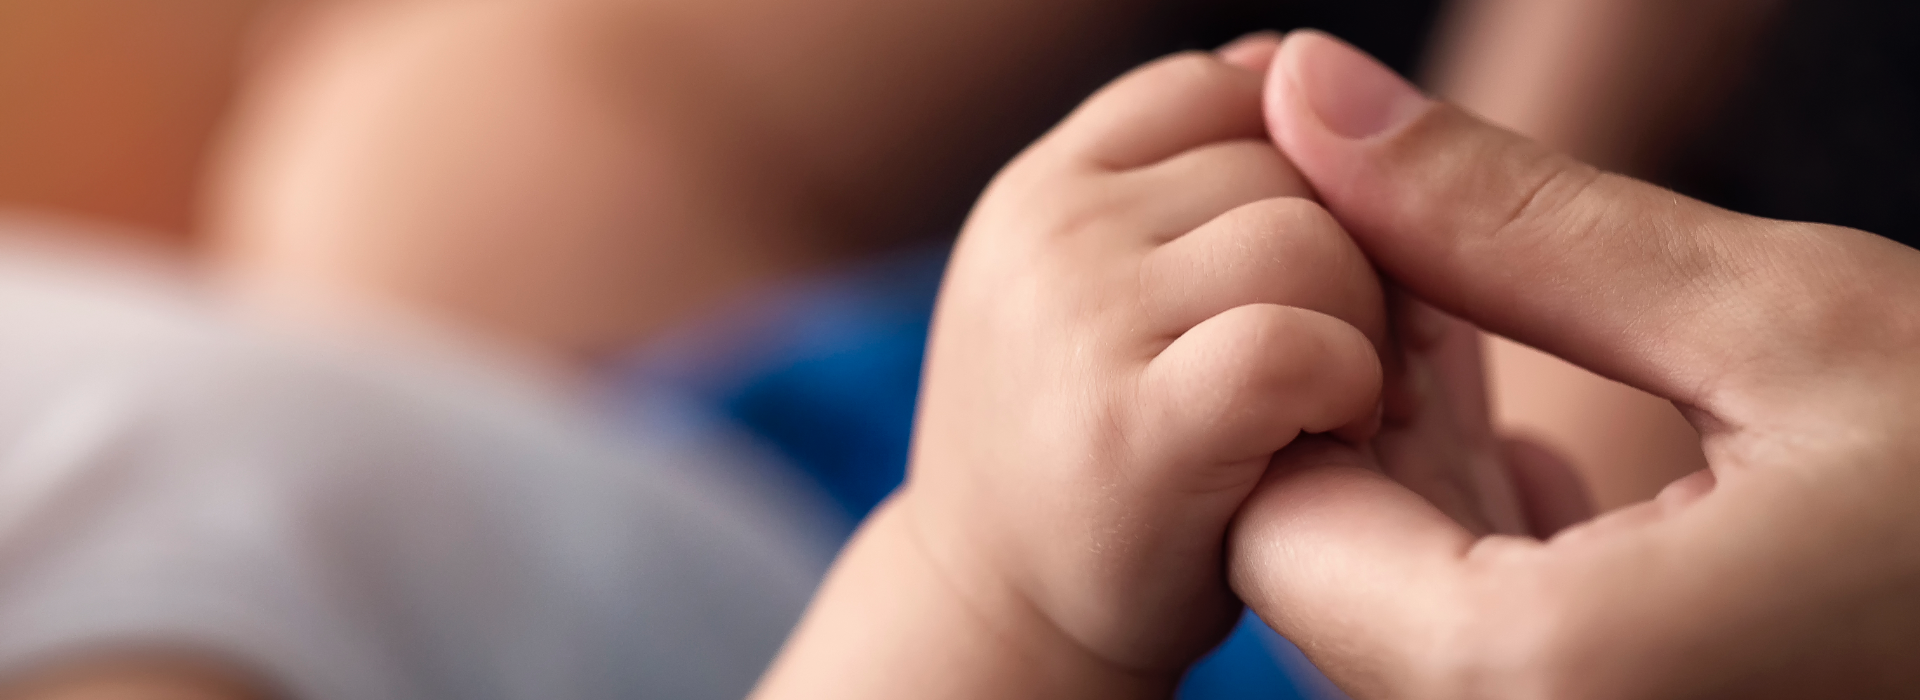 Parents holds hand with baby that suffered birth injuries.